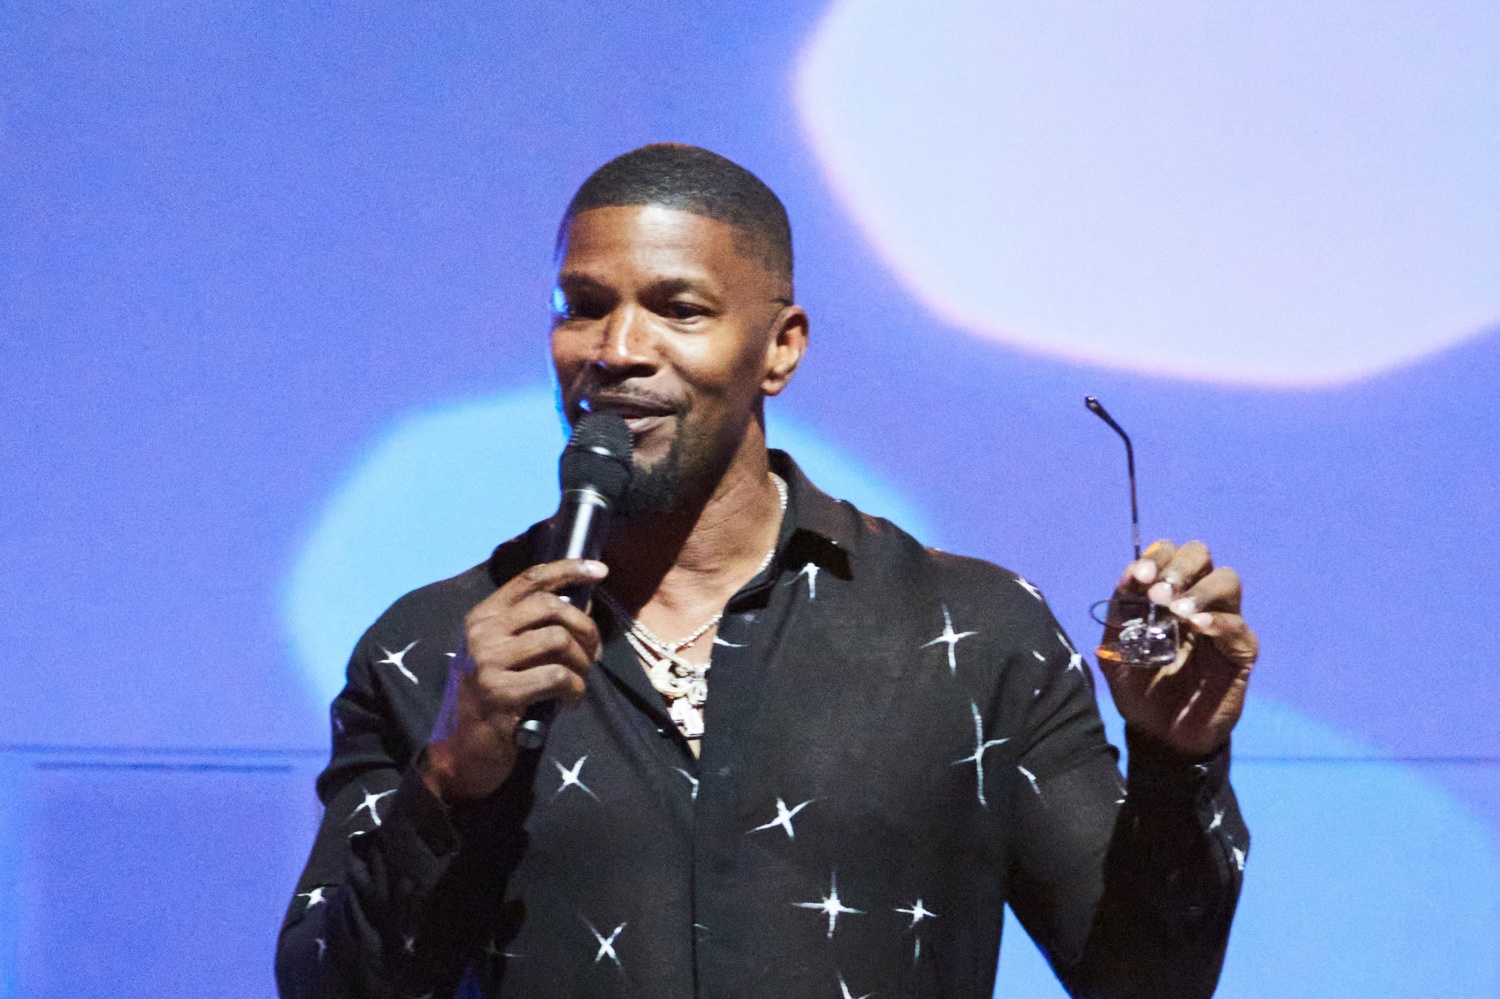 Jamie Foxx Health Issue NOT Stroke: New Video Captures Him in Motion After Previous Rumors [WATCH]